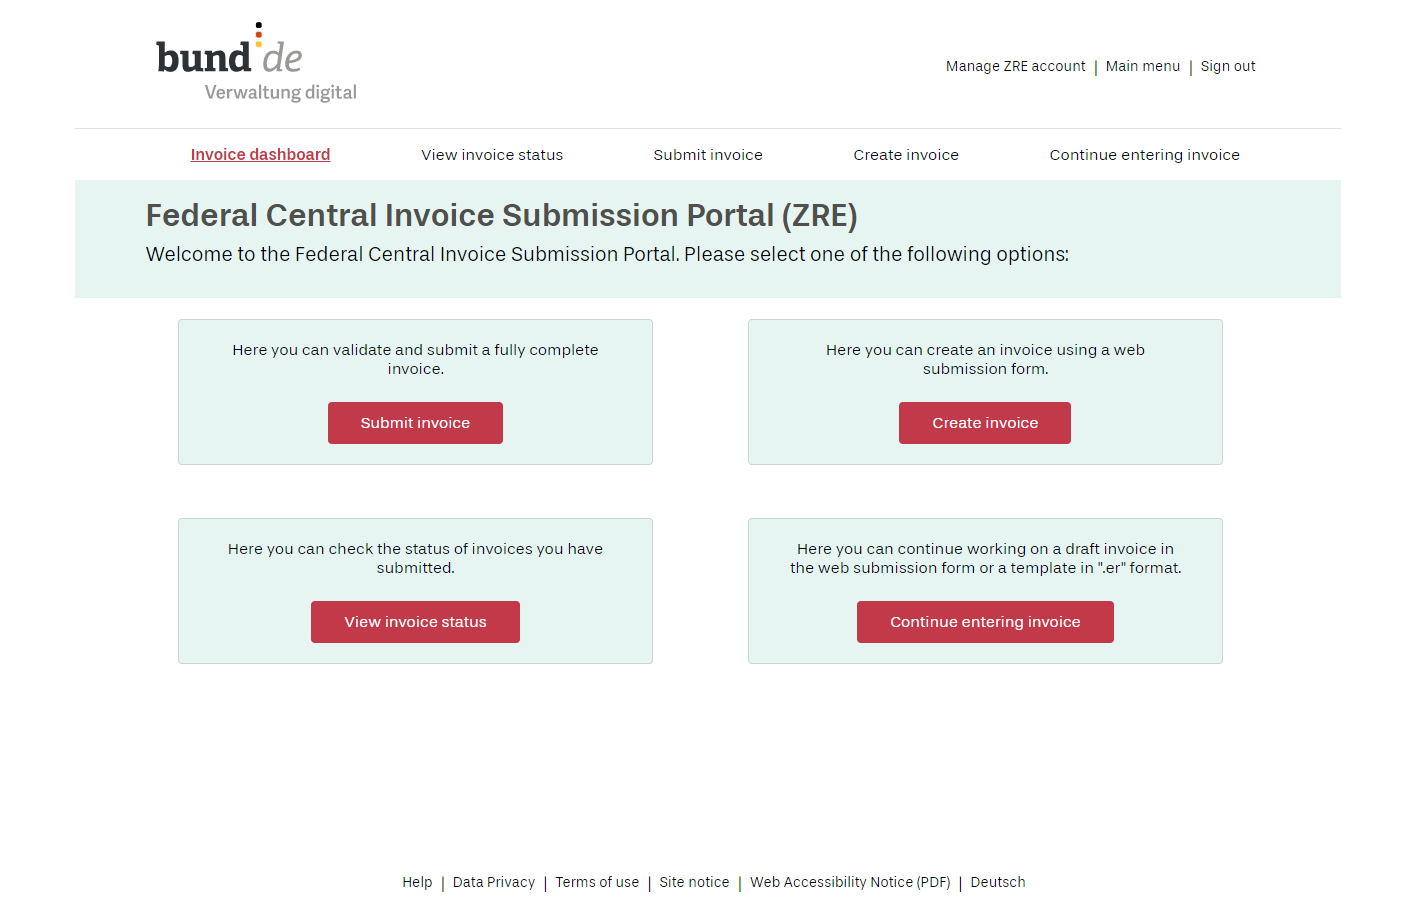 Screenshot showing the invoicing dashboard of the ZRE portal. There are four options to choose from: 1. Submit invoice, 2. Create invoice, 3. View invoice status, 4. Continue entering invoice.